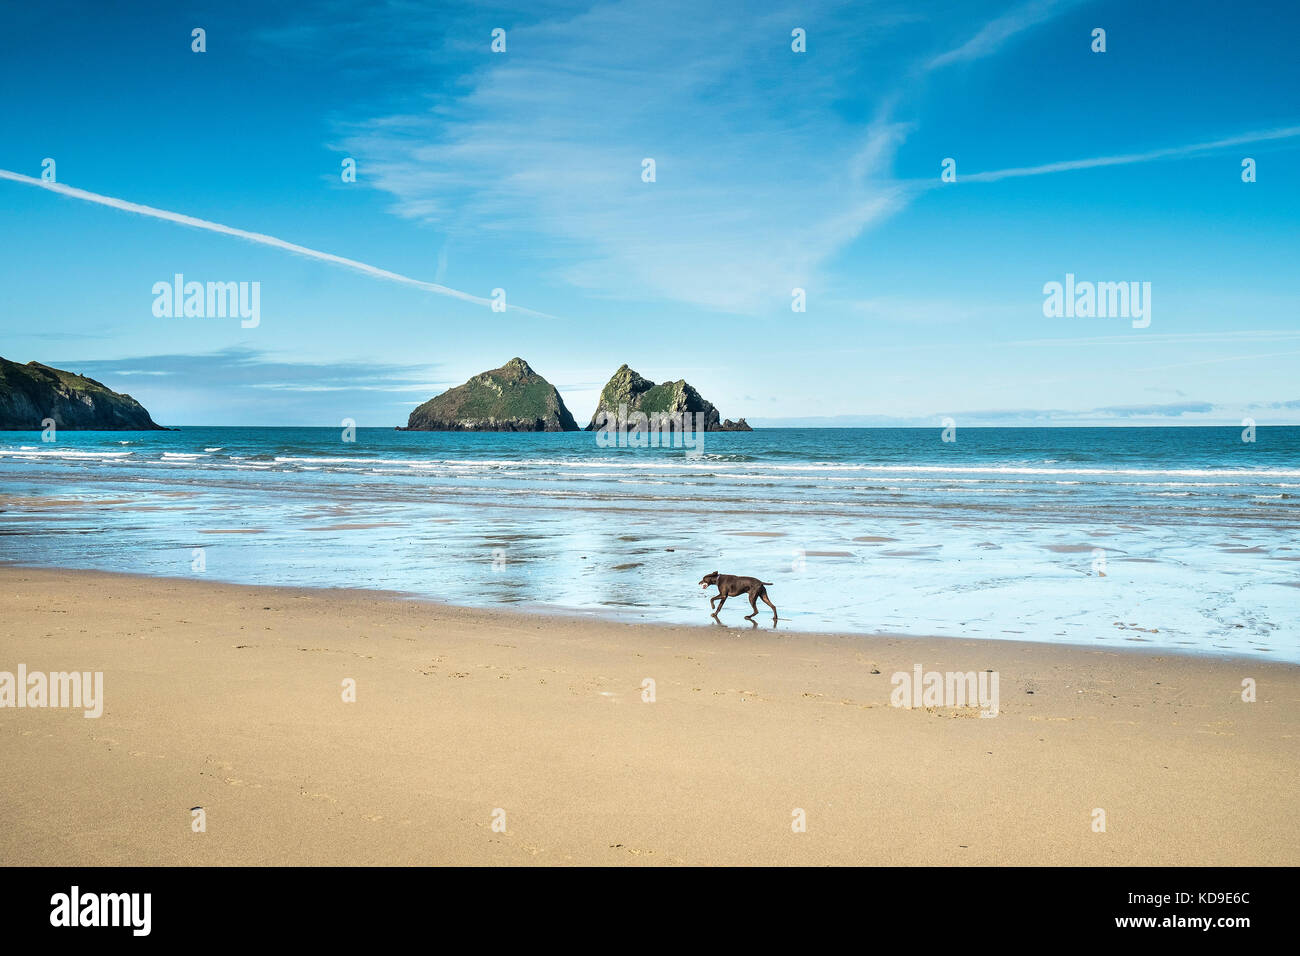 A dog running along the beach at Holywell Bay Cornwall - Gull Rocks. Holywell Bay one of the iconic Poldark film locations in Cornwall. Stock Photo